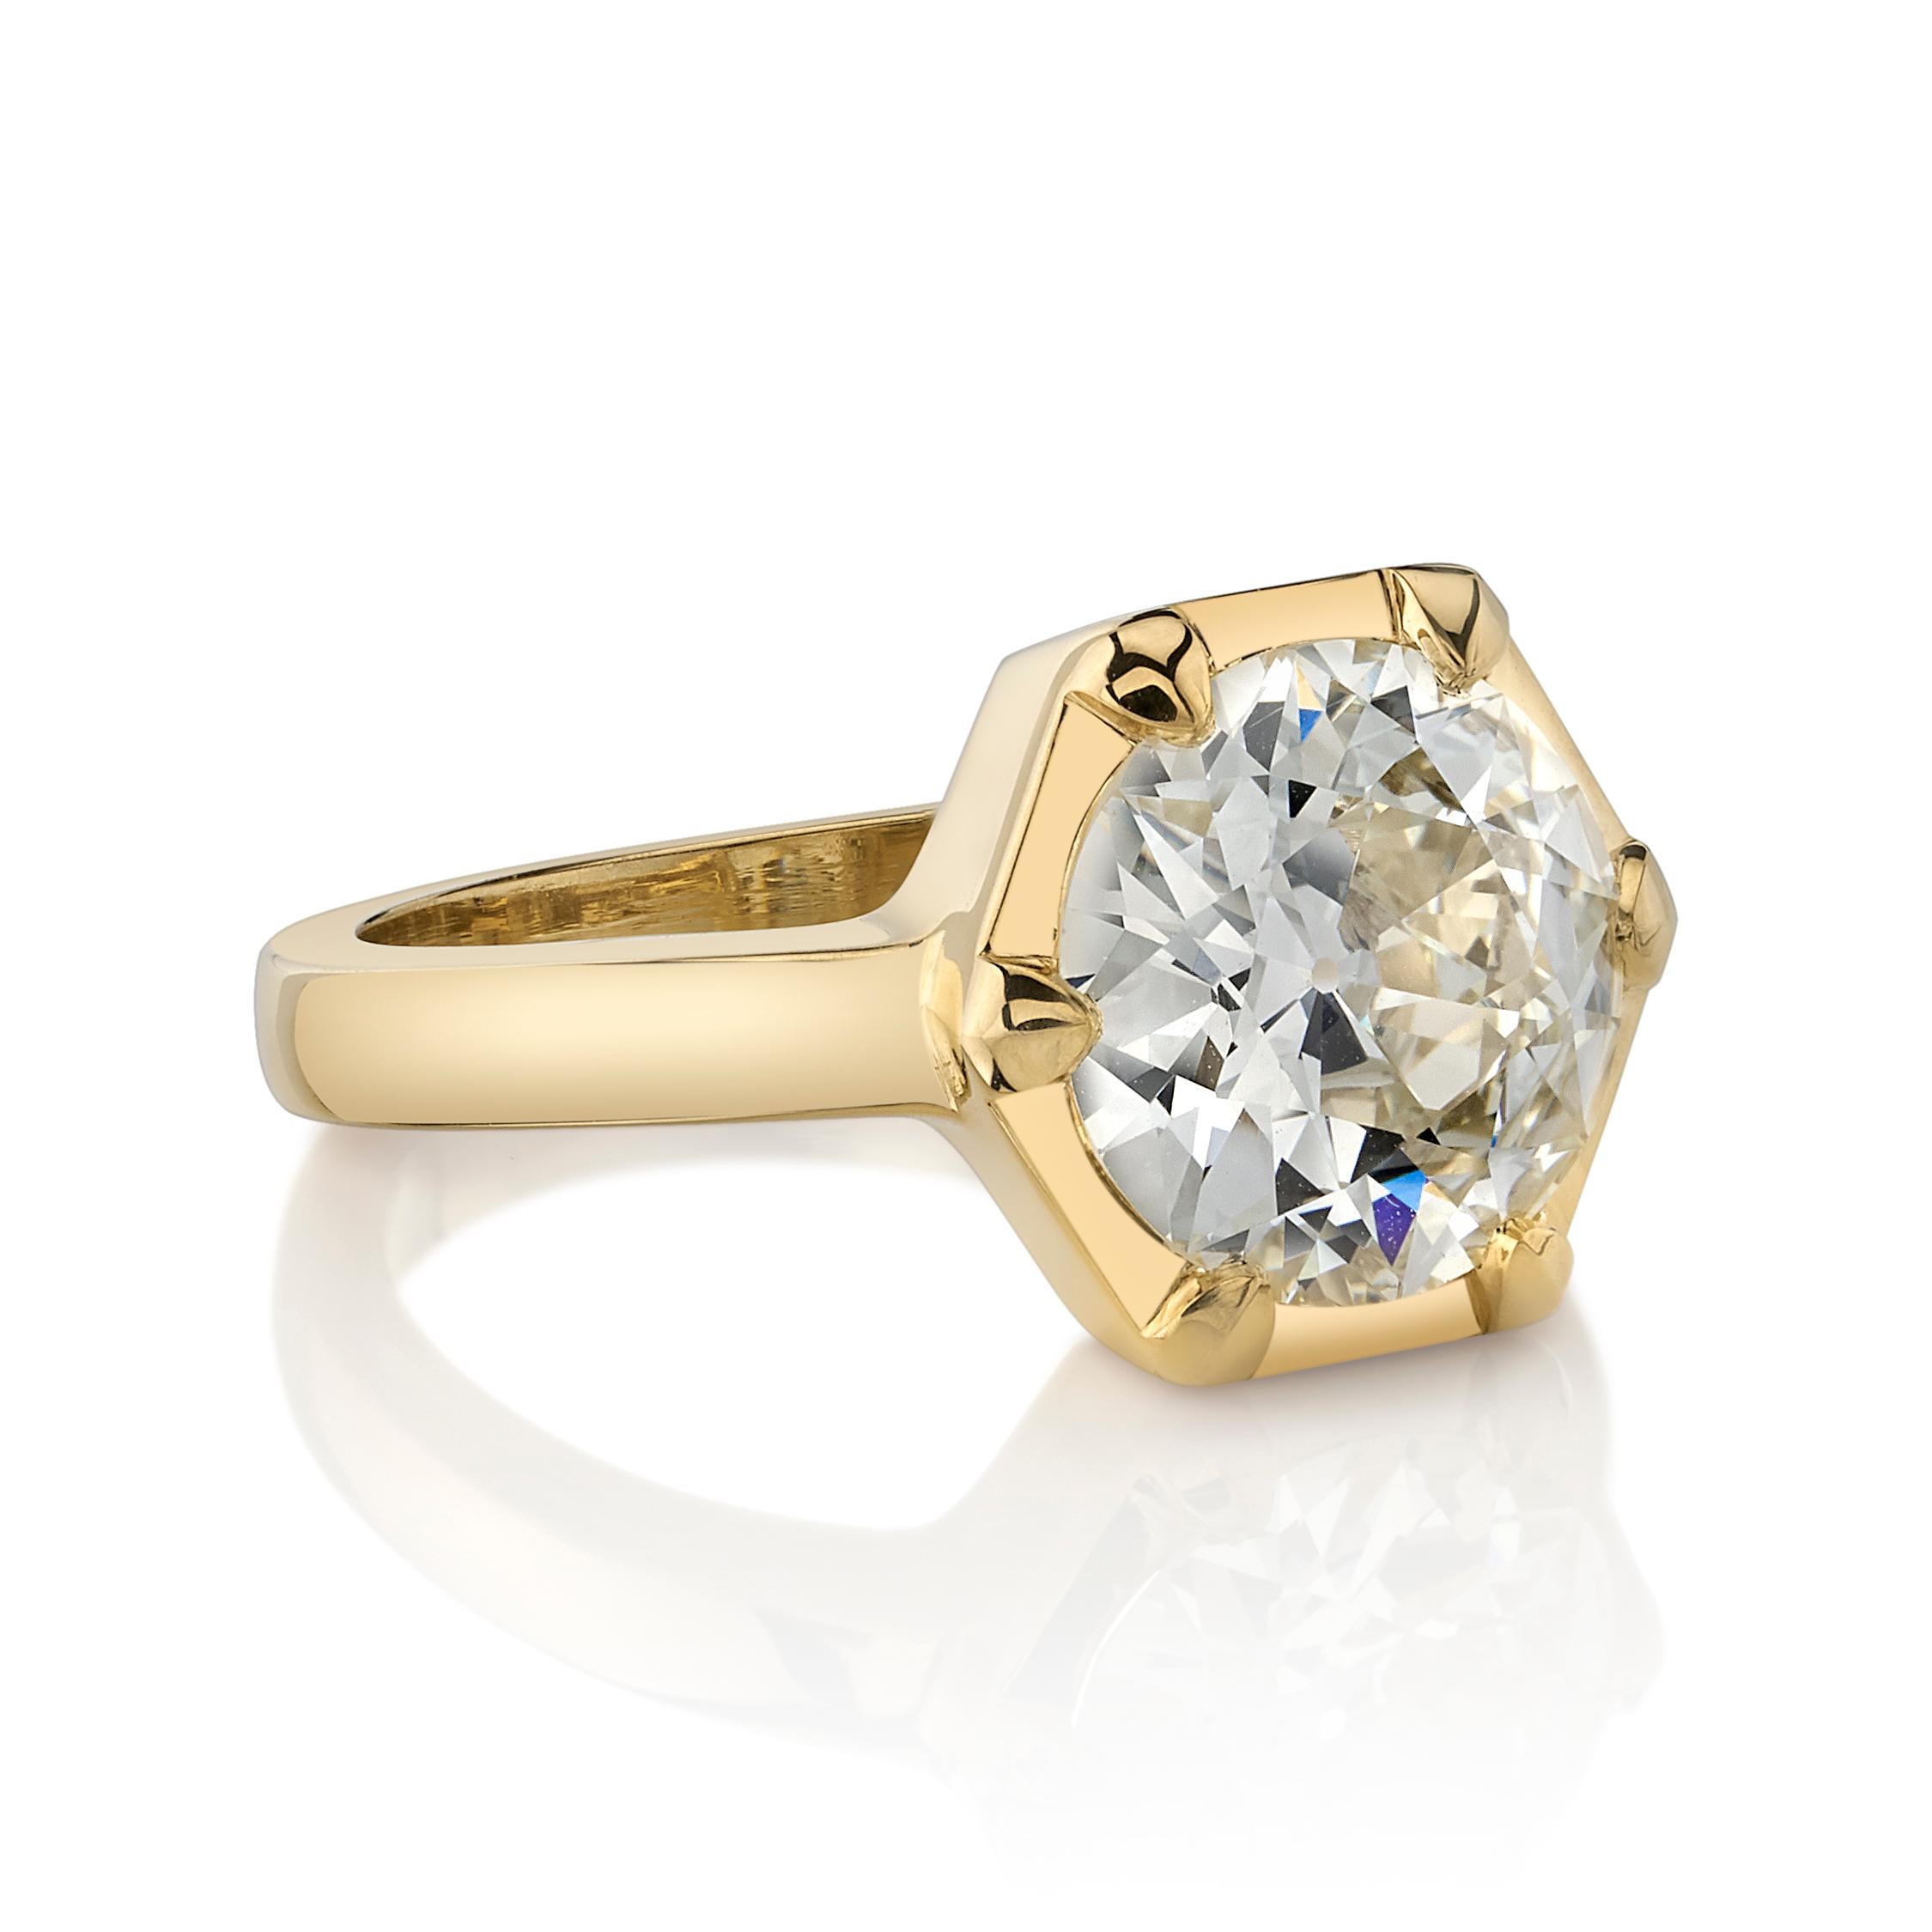 2.85ctw O-P/VS1 GIA certified old European cut diamond set in a handcrafted 18K yellow gold mounting.

Ring is a size 6 and can be sized to fit.